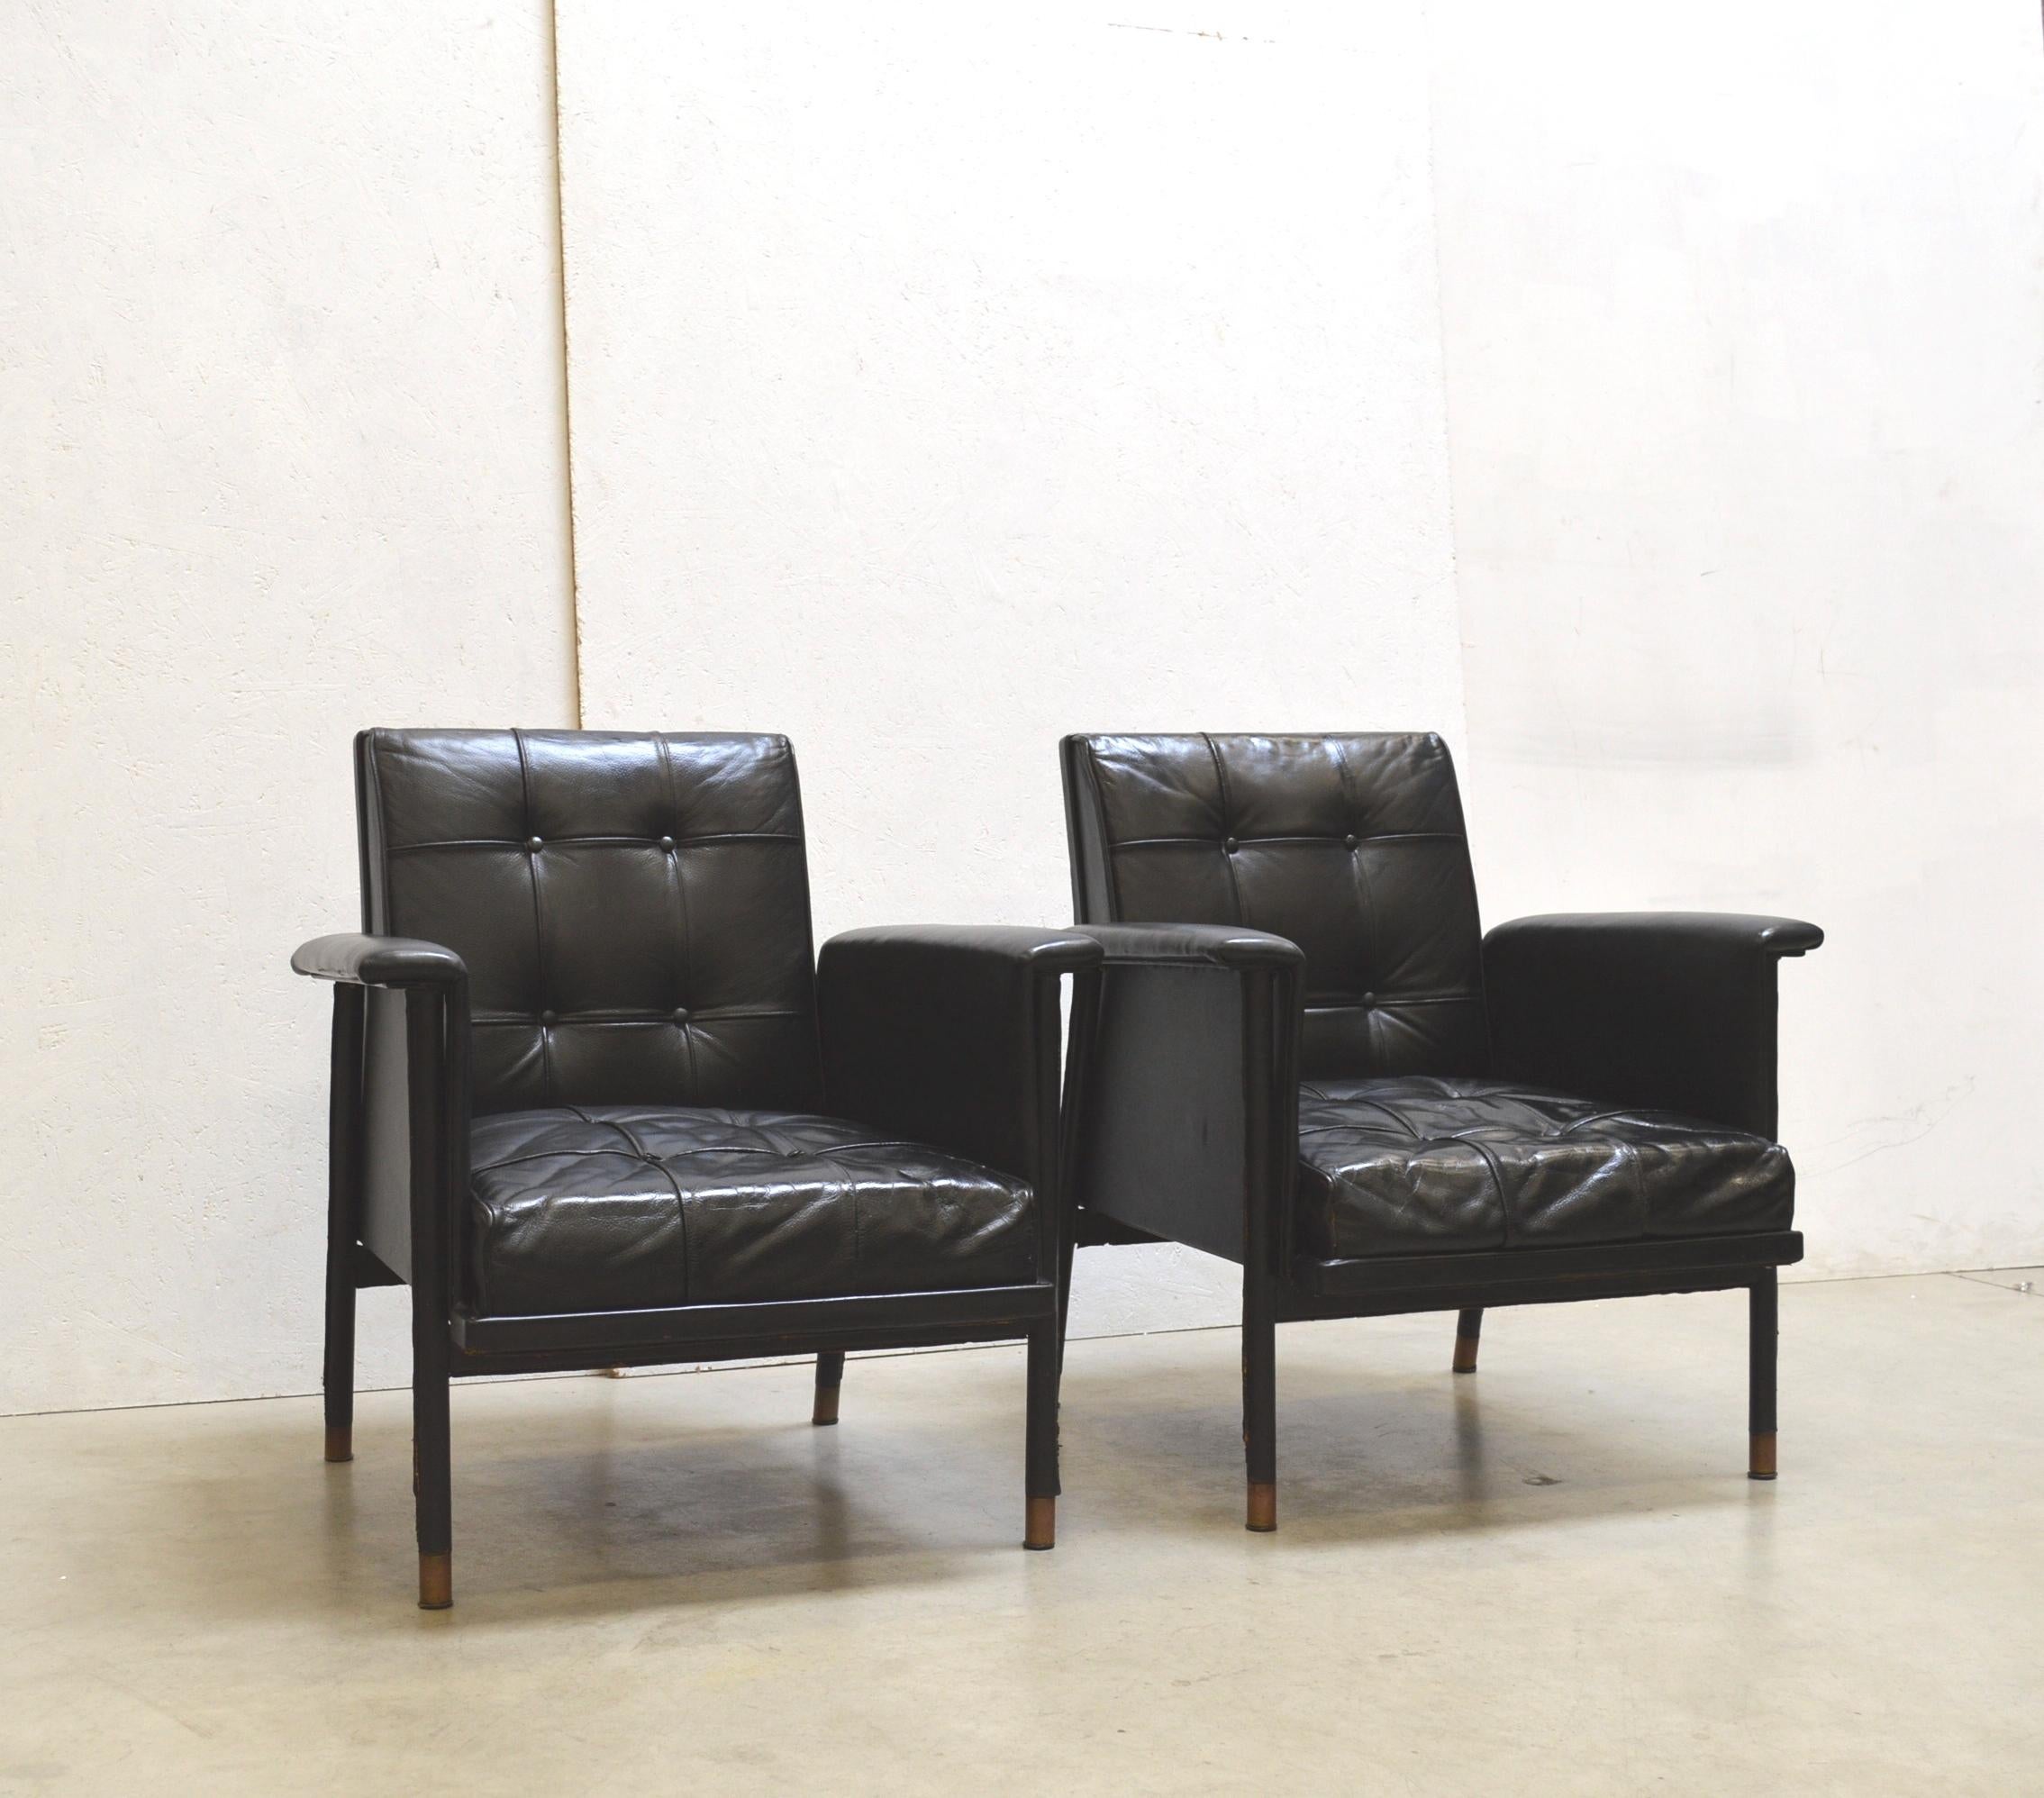 Very rare and fine armchairs by Jacques Quinet. Made in France in the early 1960s.
Fine black leather upholstery. The feets comes with brass encased legs.

Stunning pieces. Nice vintage condition with usual kinds of useage.

Literature: